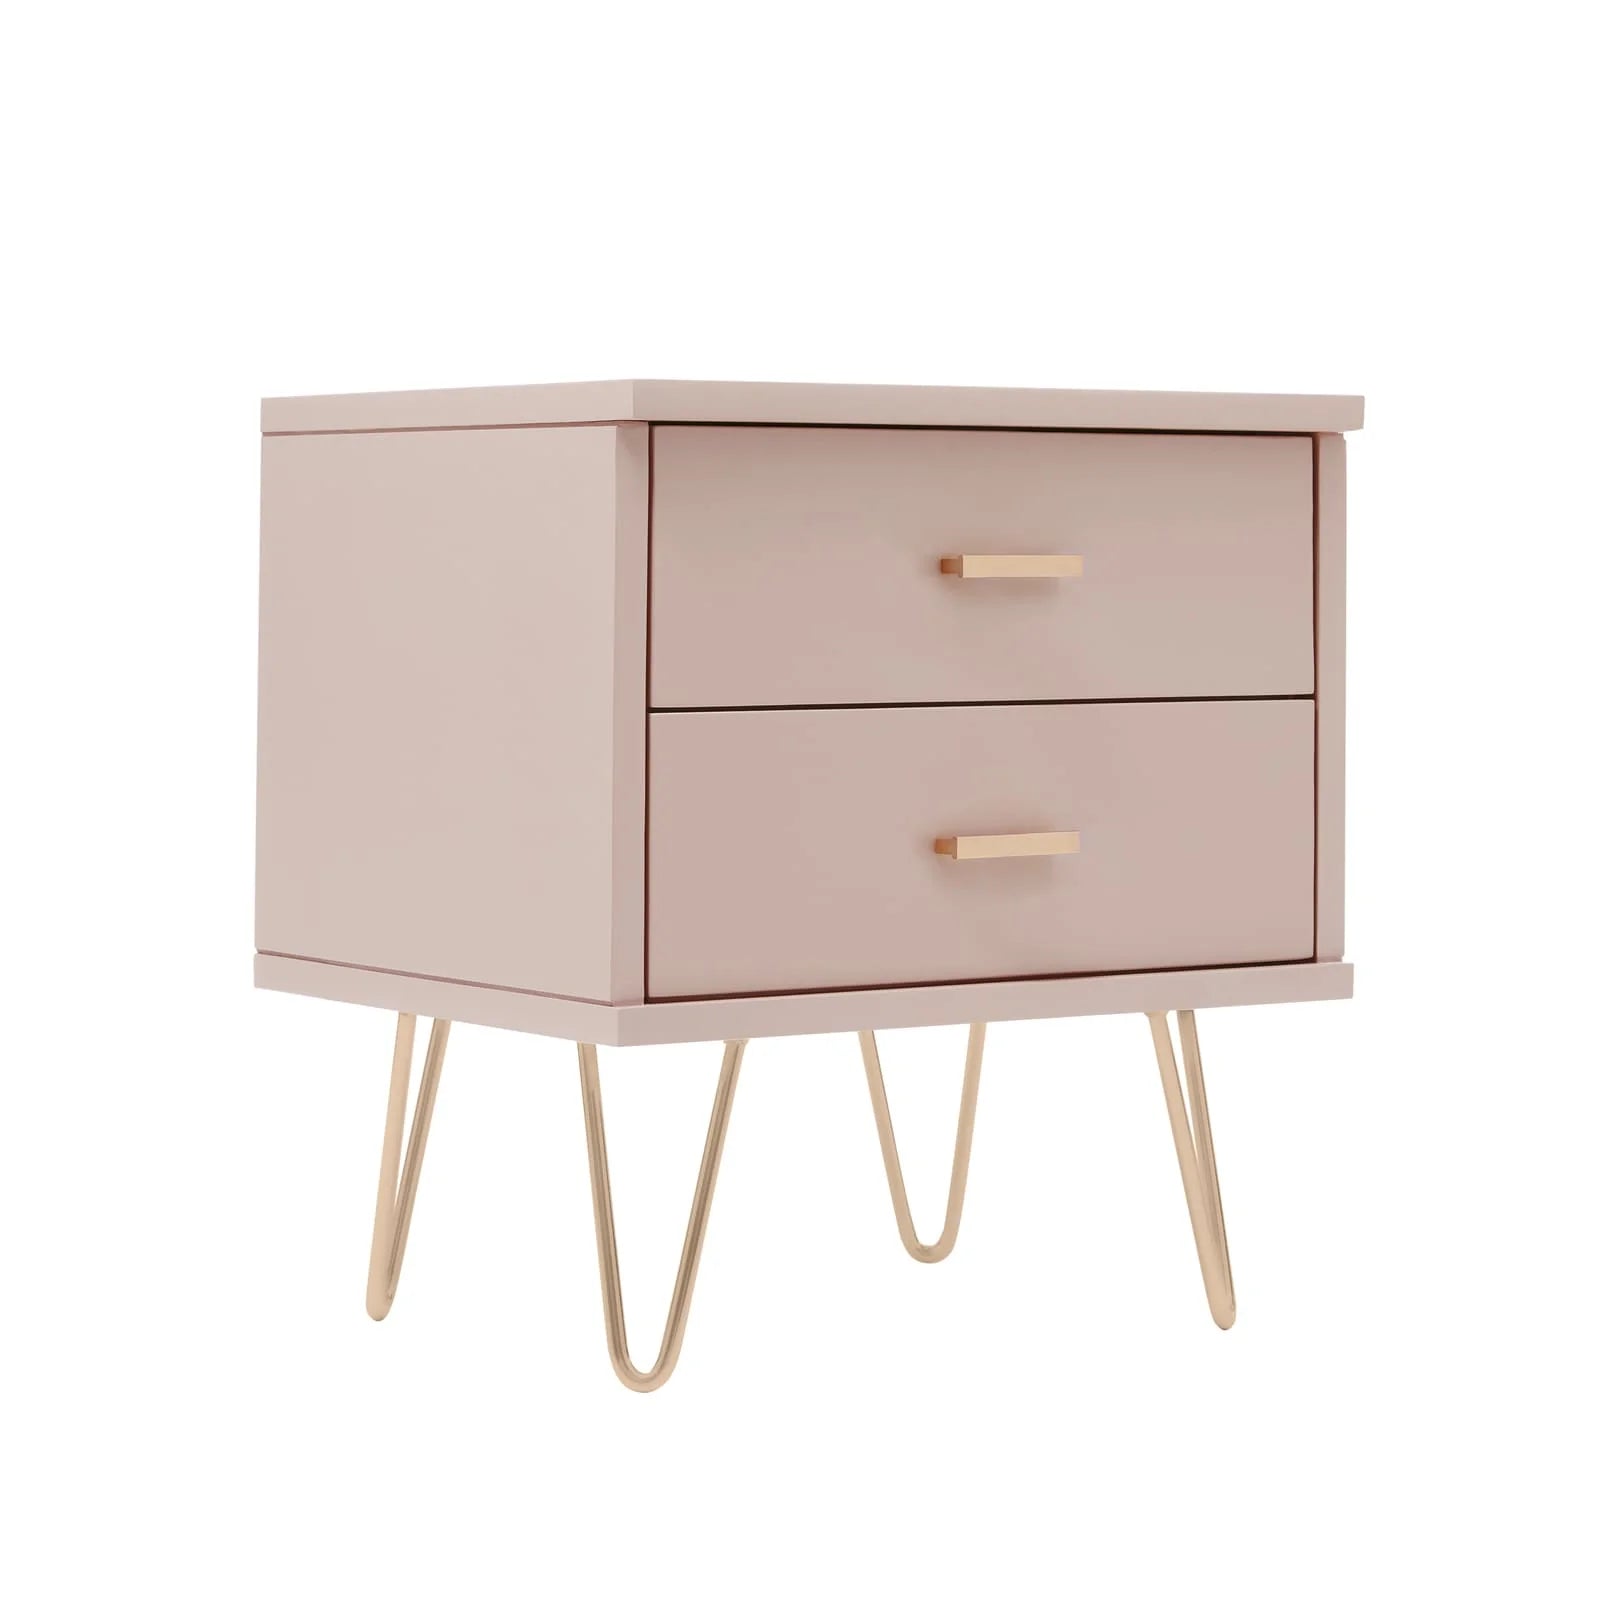 Monroe pink painted solid wood bedside table with 2 drawers and metal hardware | malletandplane.com